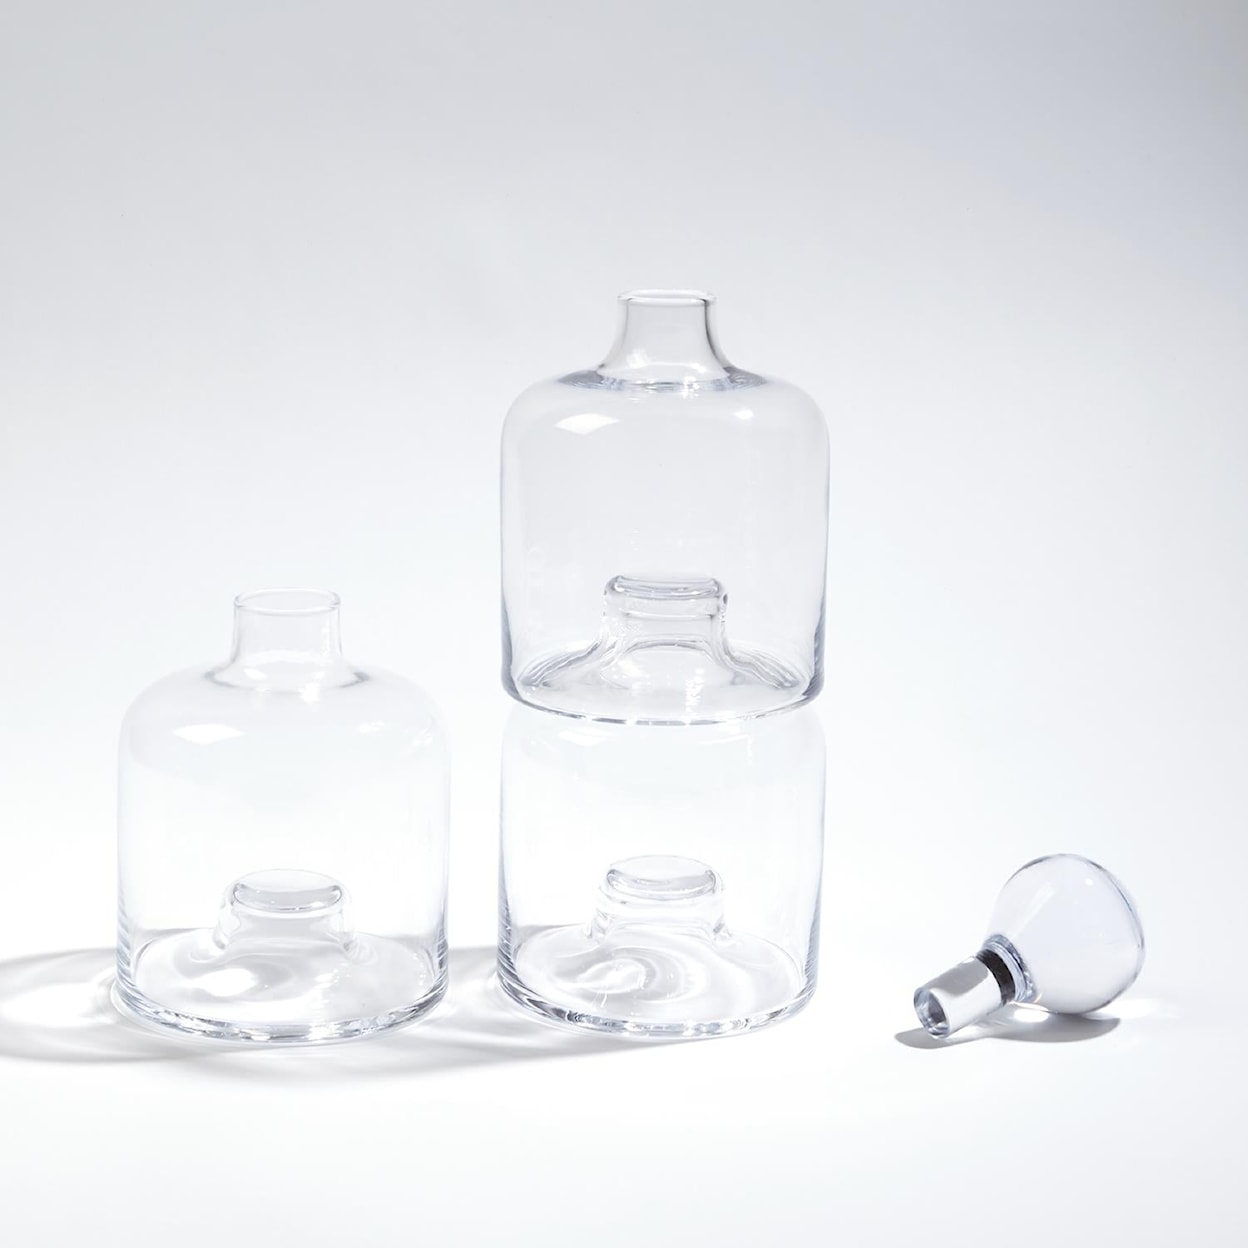 Global Views Accents Triple Stacking Decanter